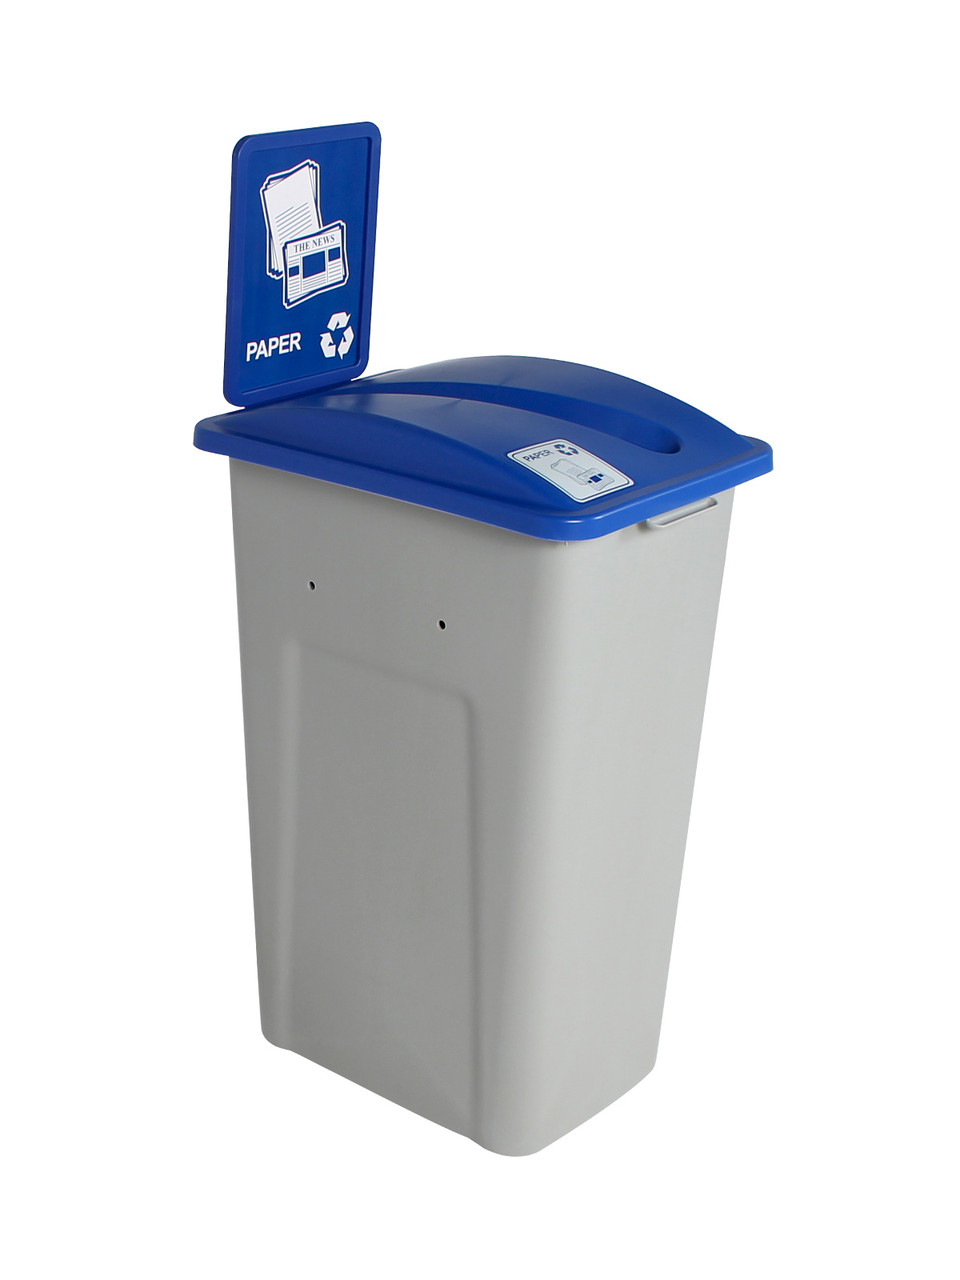 32 Gallon XL Simple Sort Recycling Bin with Sign (Paper, Blue Lid)